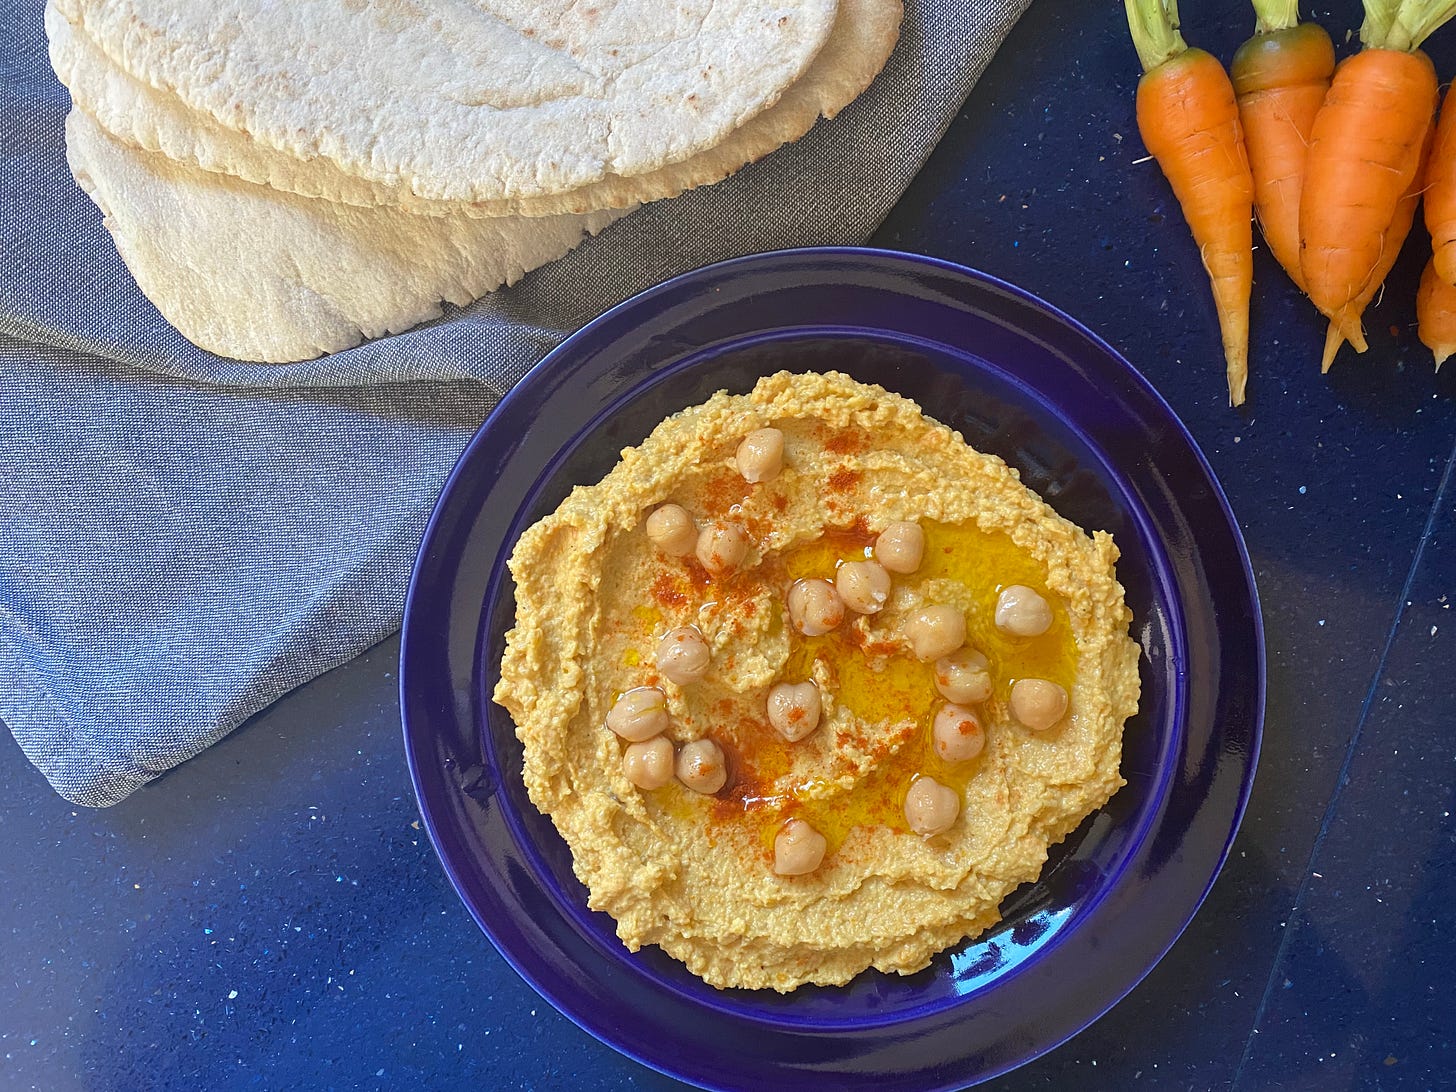 Blue plate with a serving of houmous, scattered with chickpease and paprika. Some pitta breads and carrots are to the side of the plate.